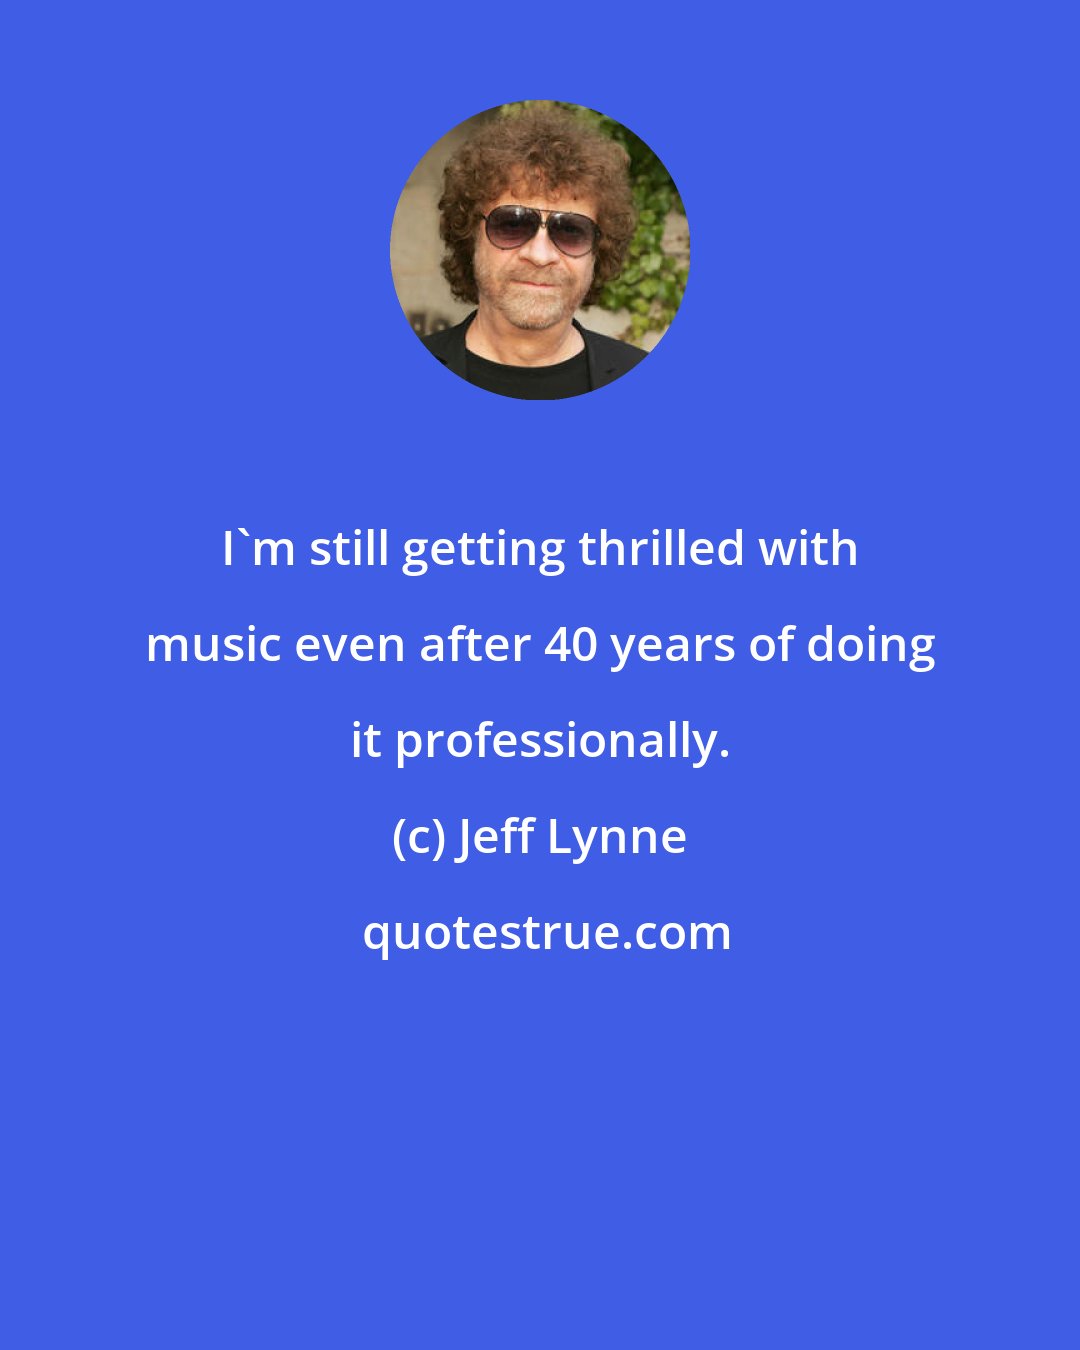 Jeff Lynne: I'm still getting thrilled with music even after 40 years of doing it professionally.